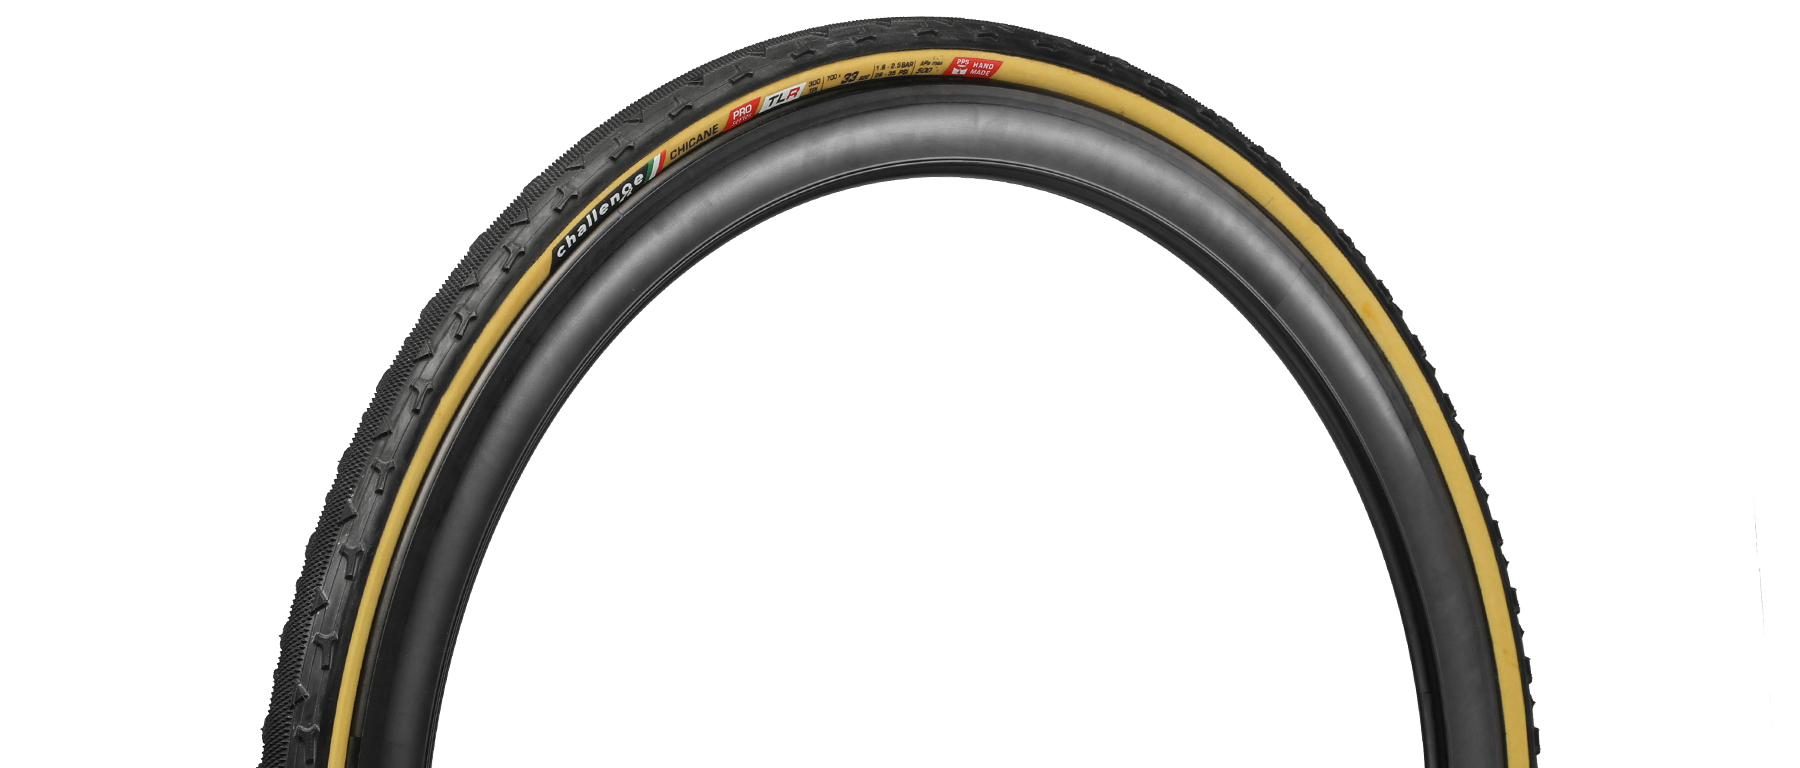 Challenge Chicane Pro Series TLR Cyclocross Tire